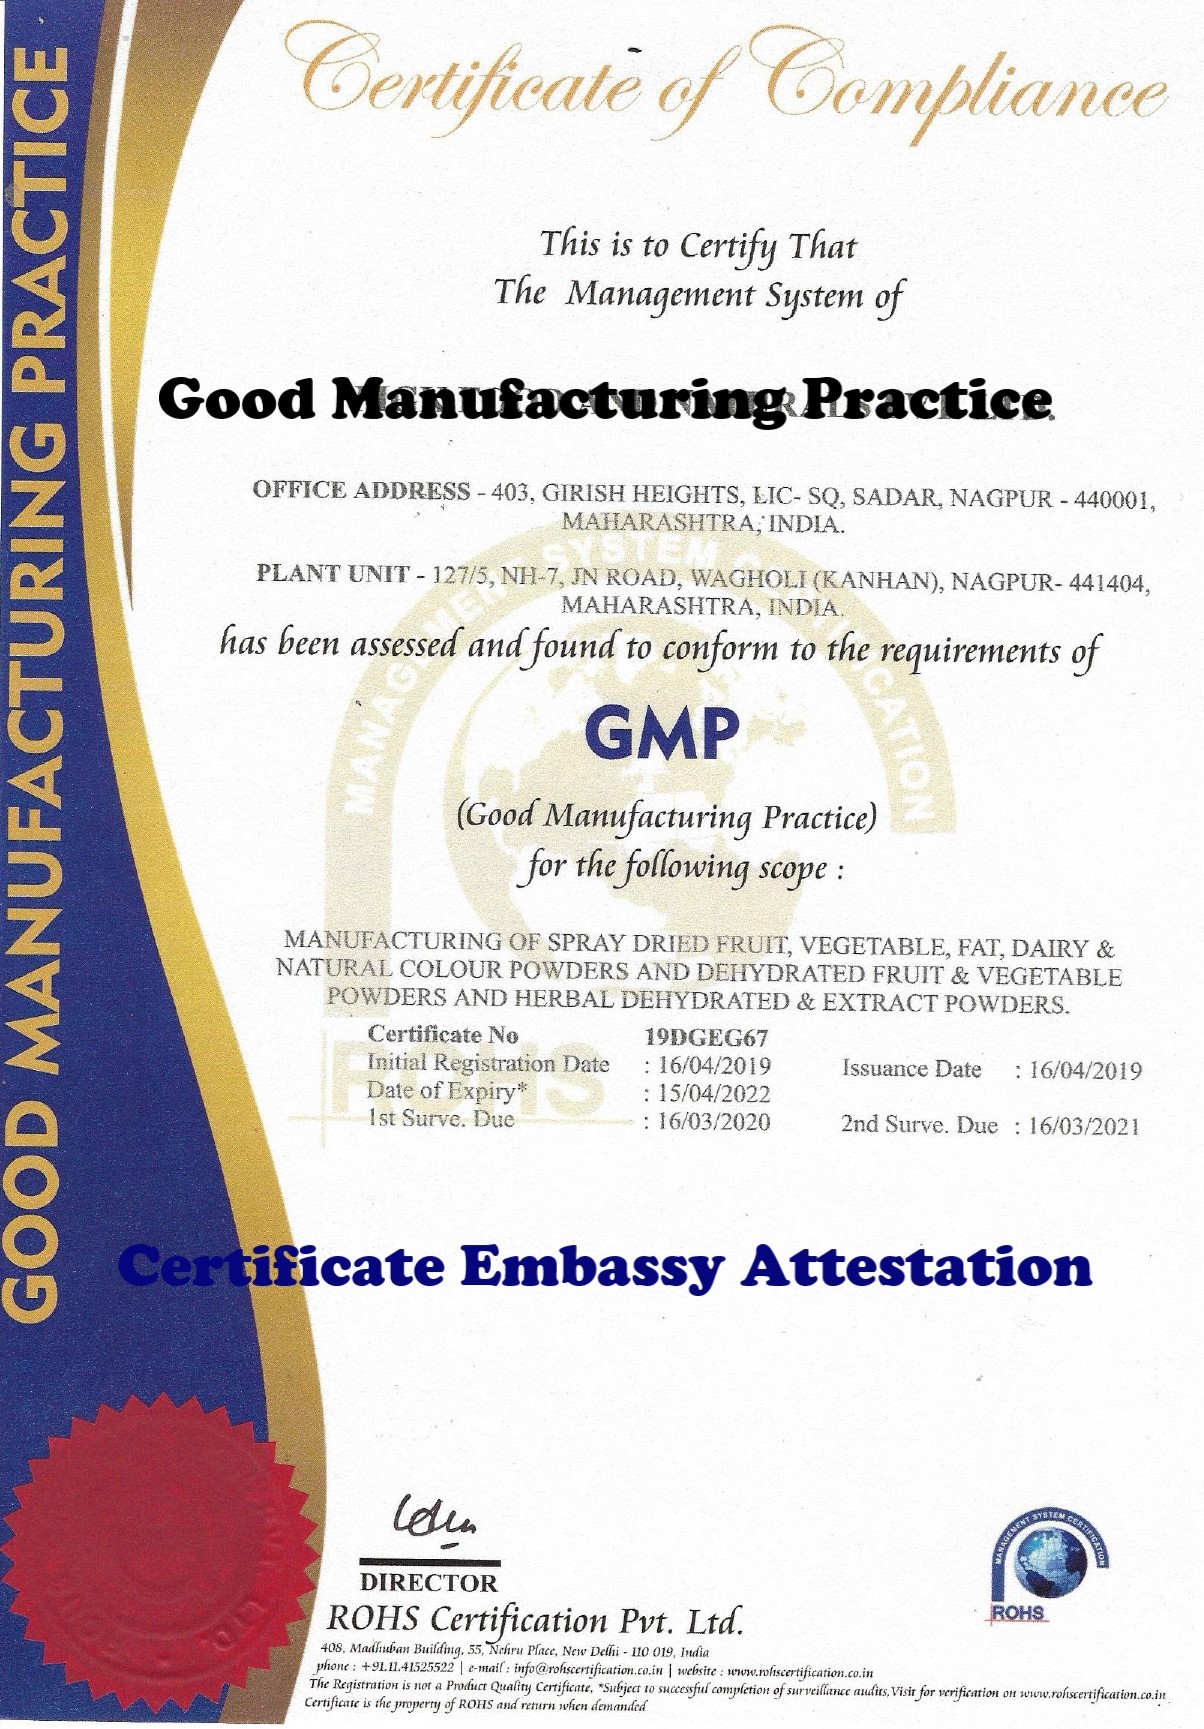 GMP Certificate Attestation from Tunisia Embassy